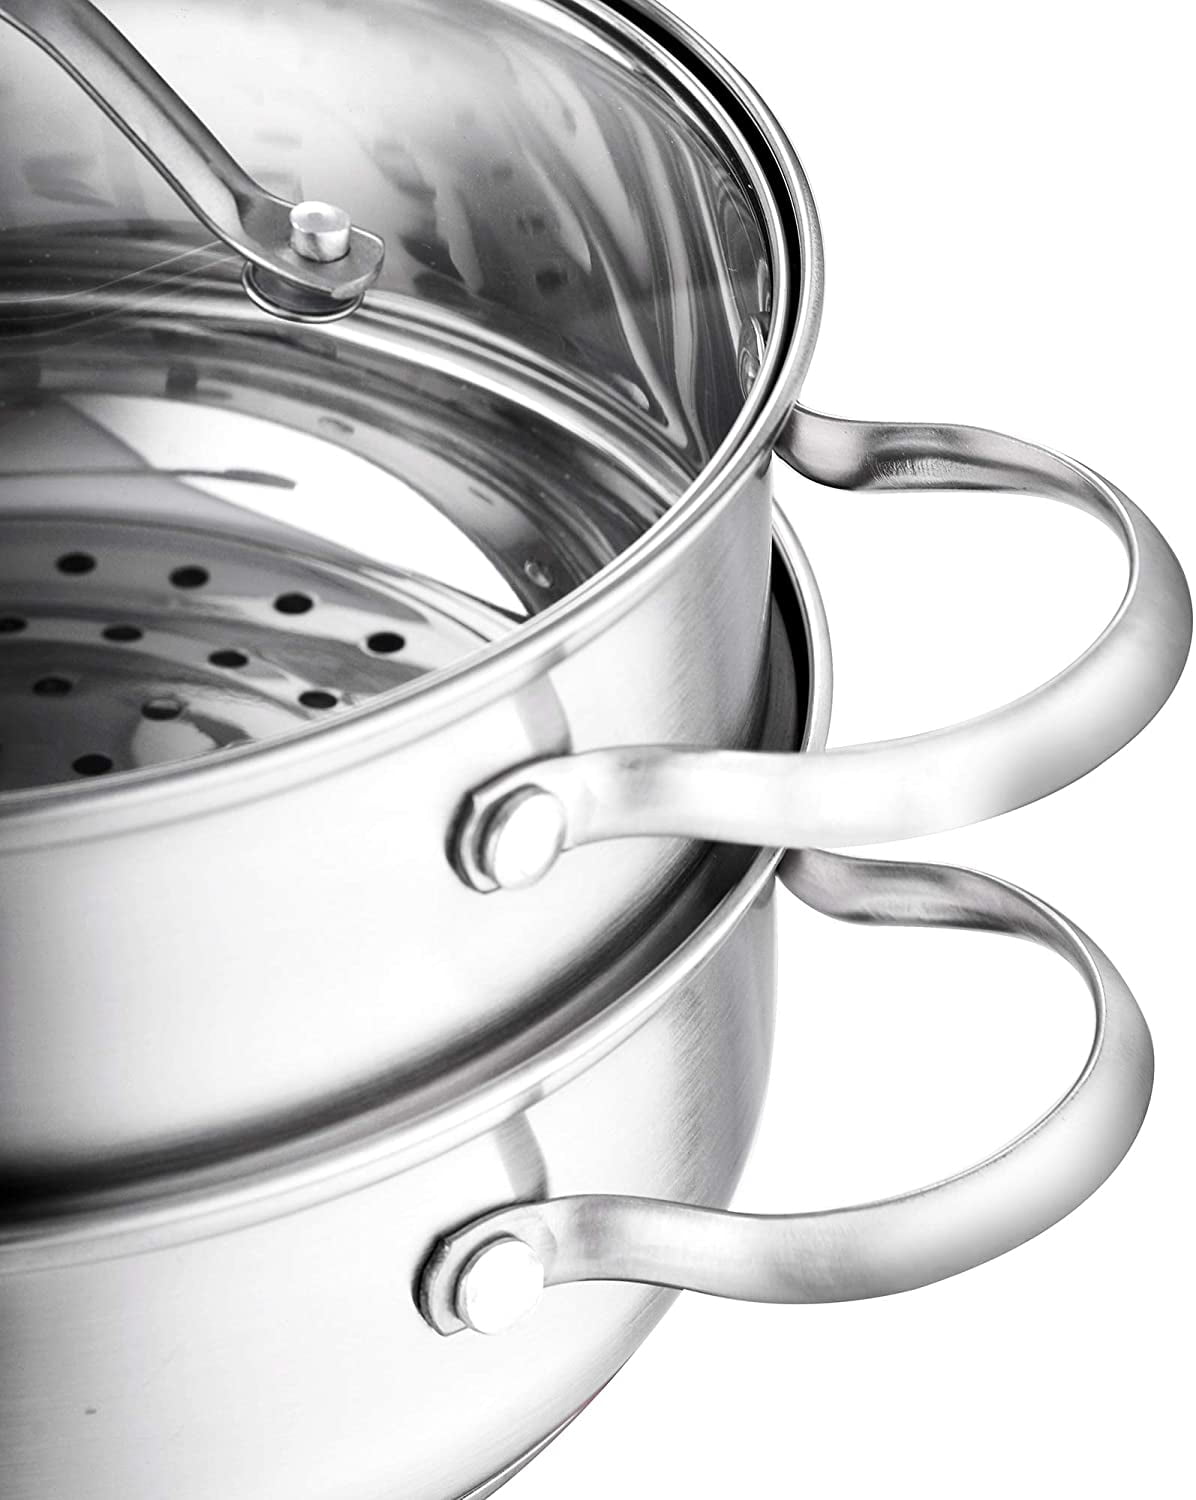 14-Piece Stainless Steel Assorted Cookware set with Glass Lids - Bed Bath &  Beyond - 32950807